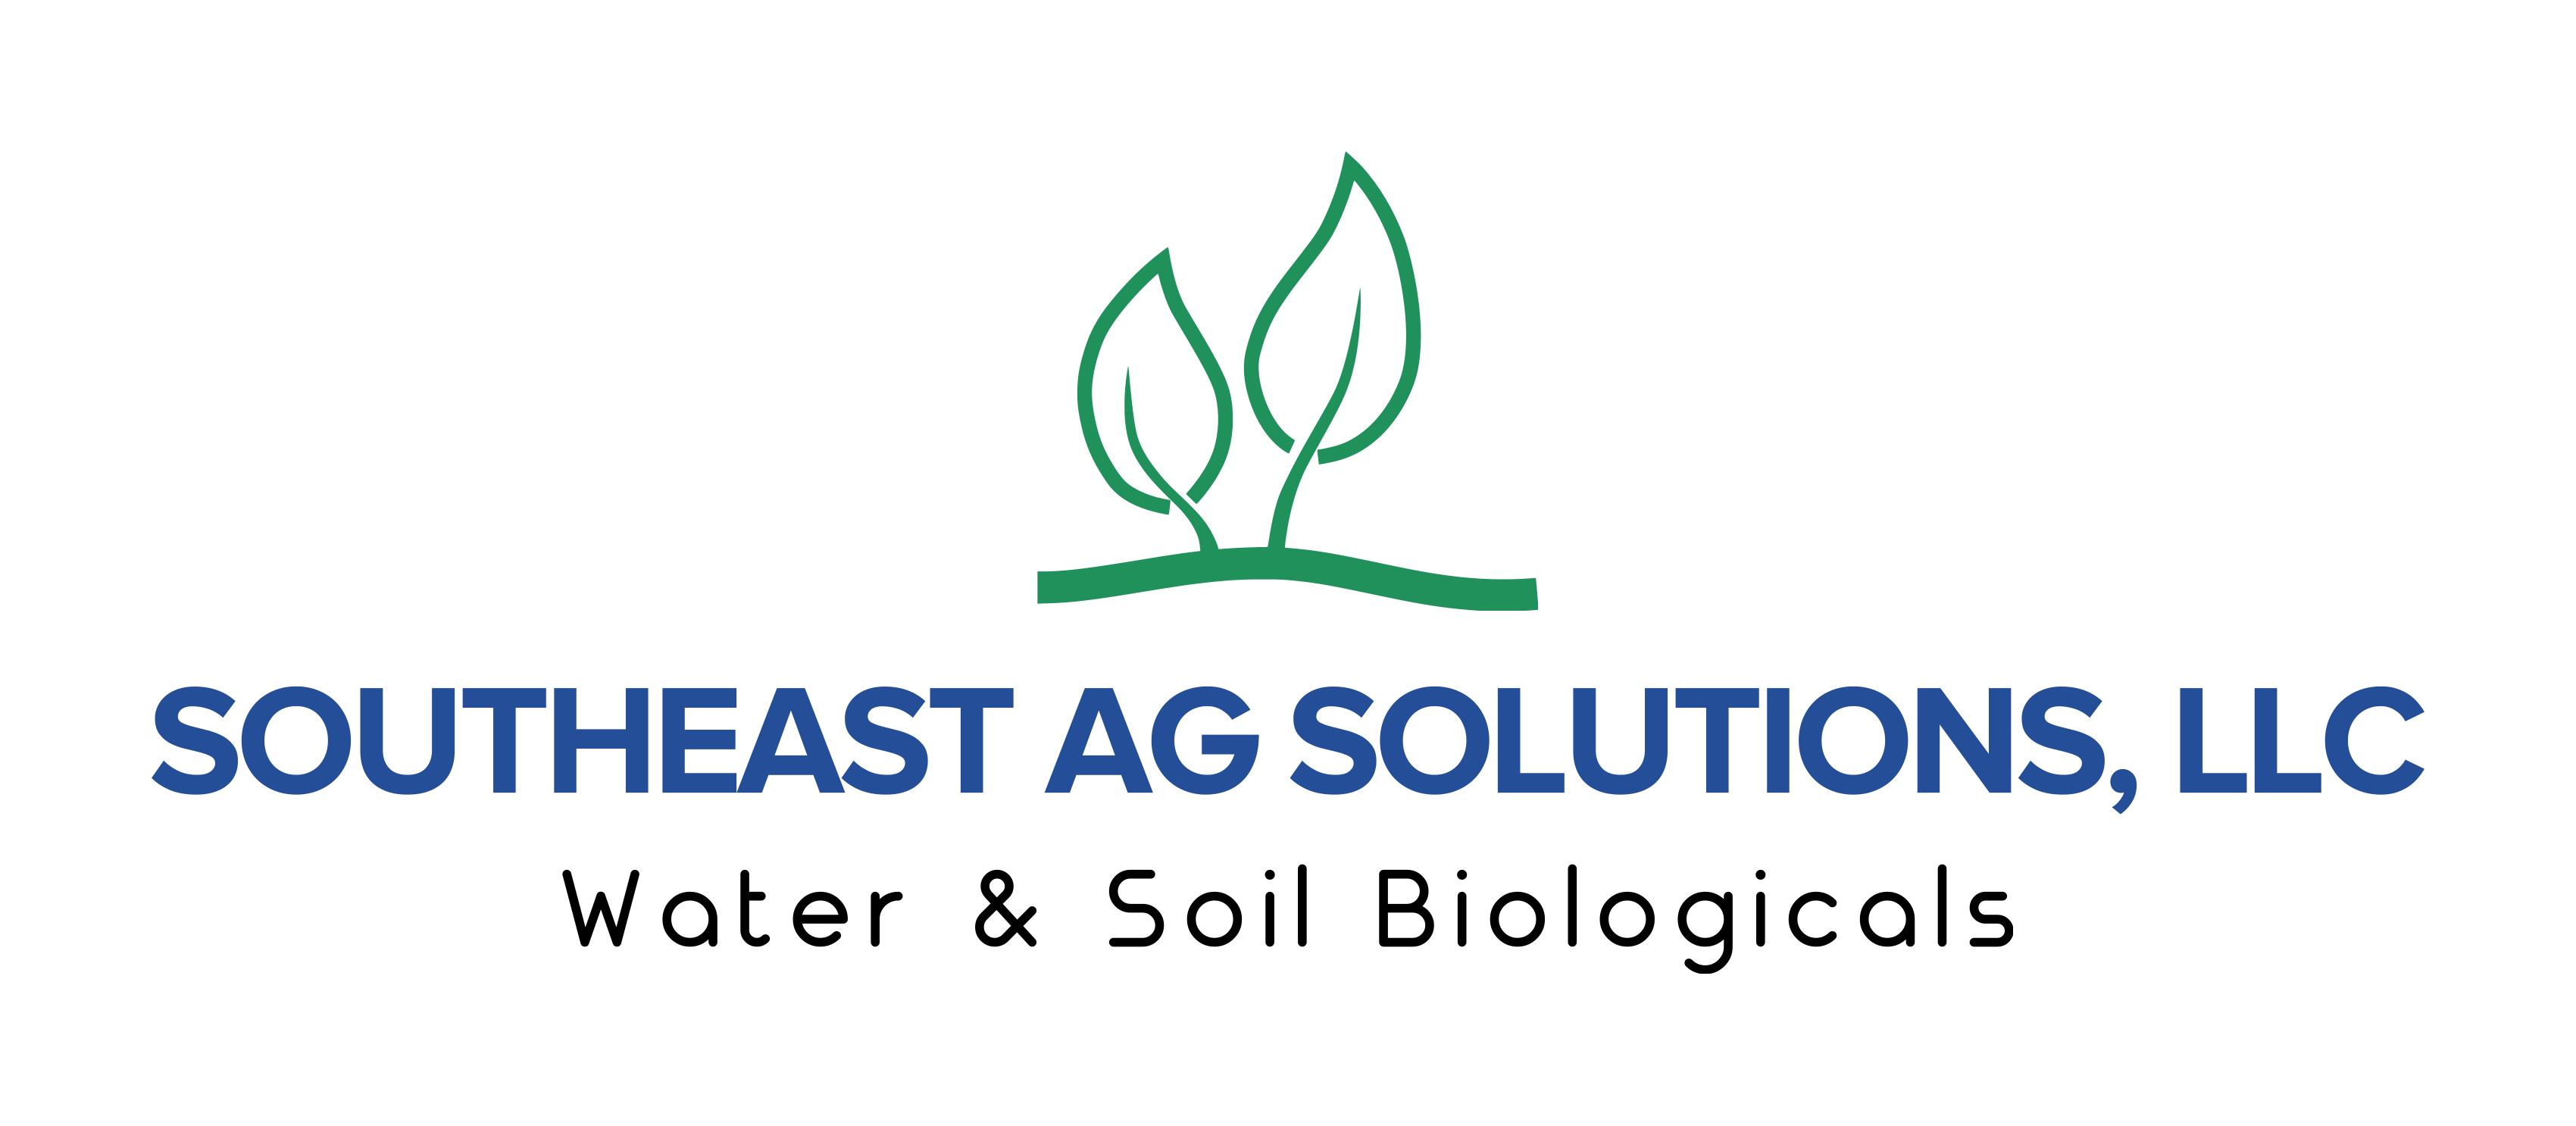 Southeast Ag Solutions